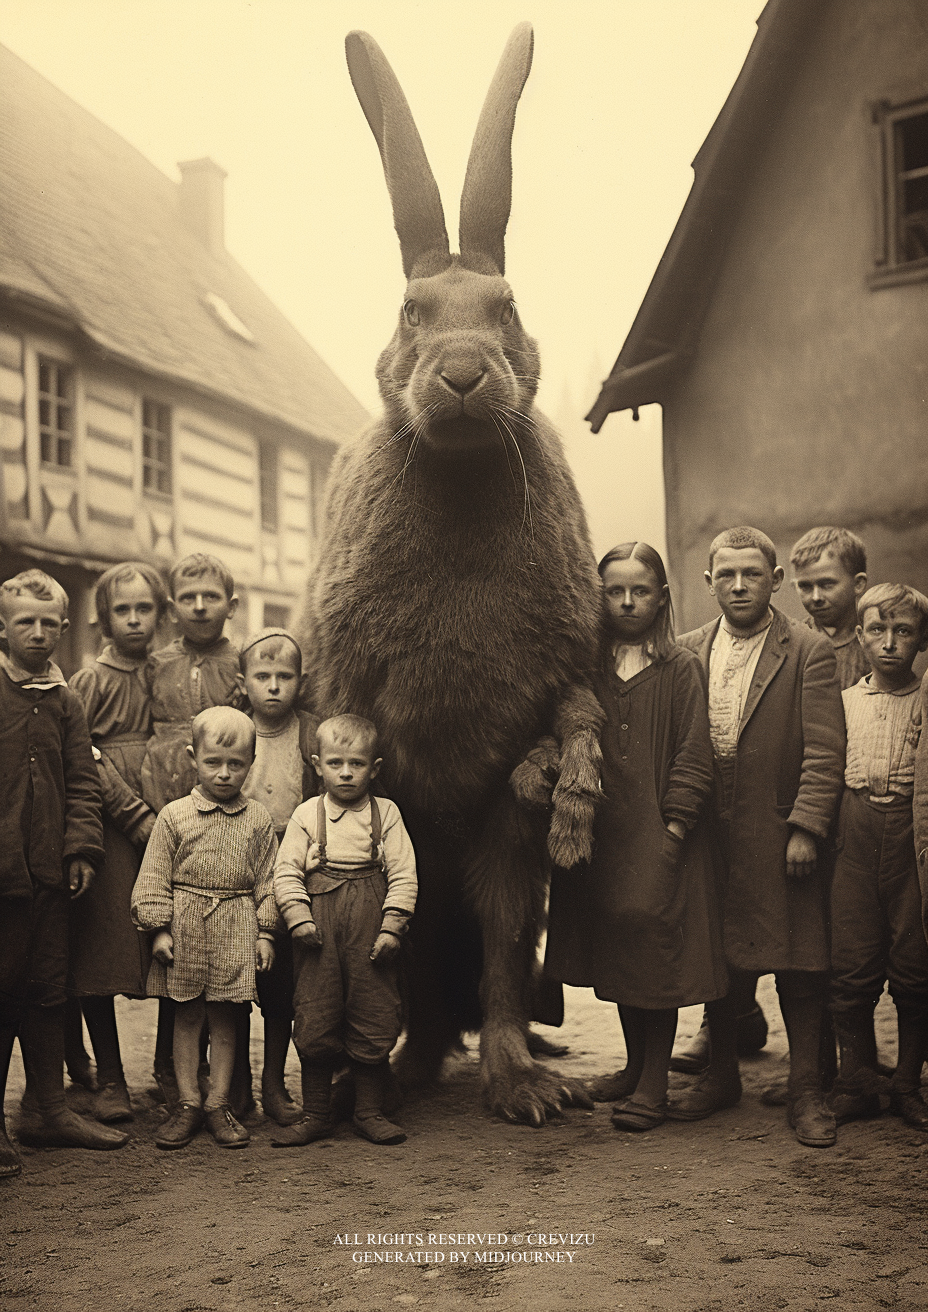 a vintage photo portrait of rabbit with people (사진=크레비쥬)